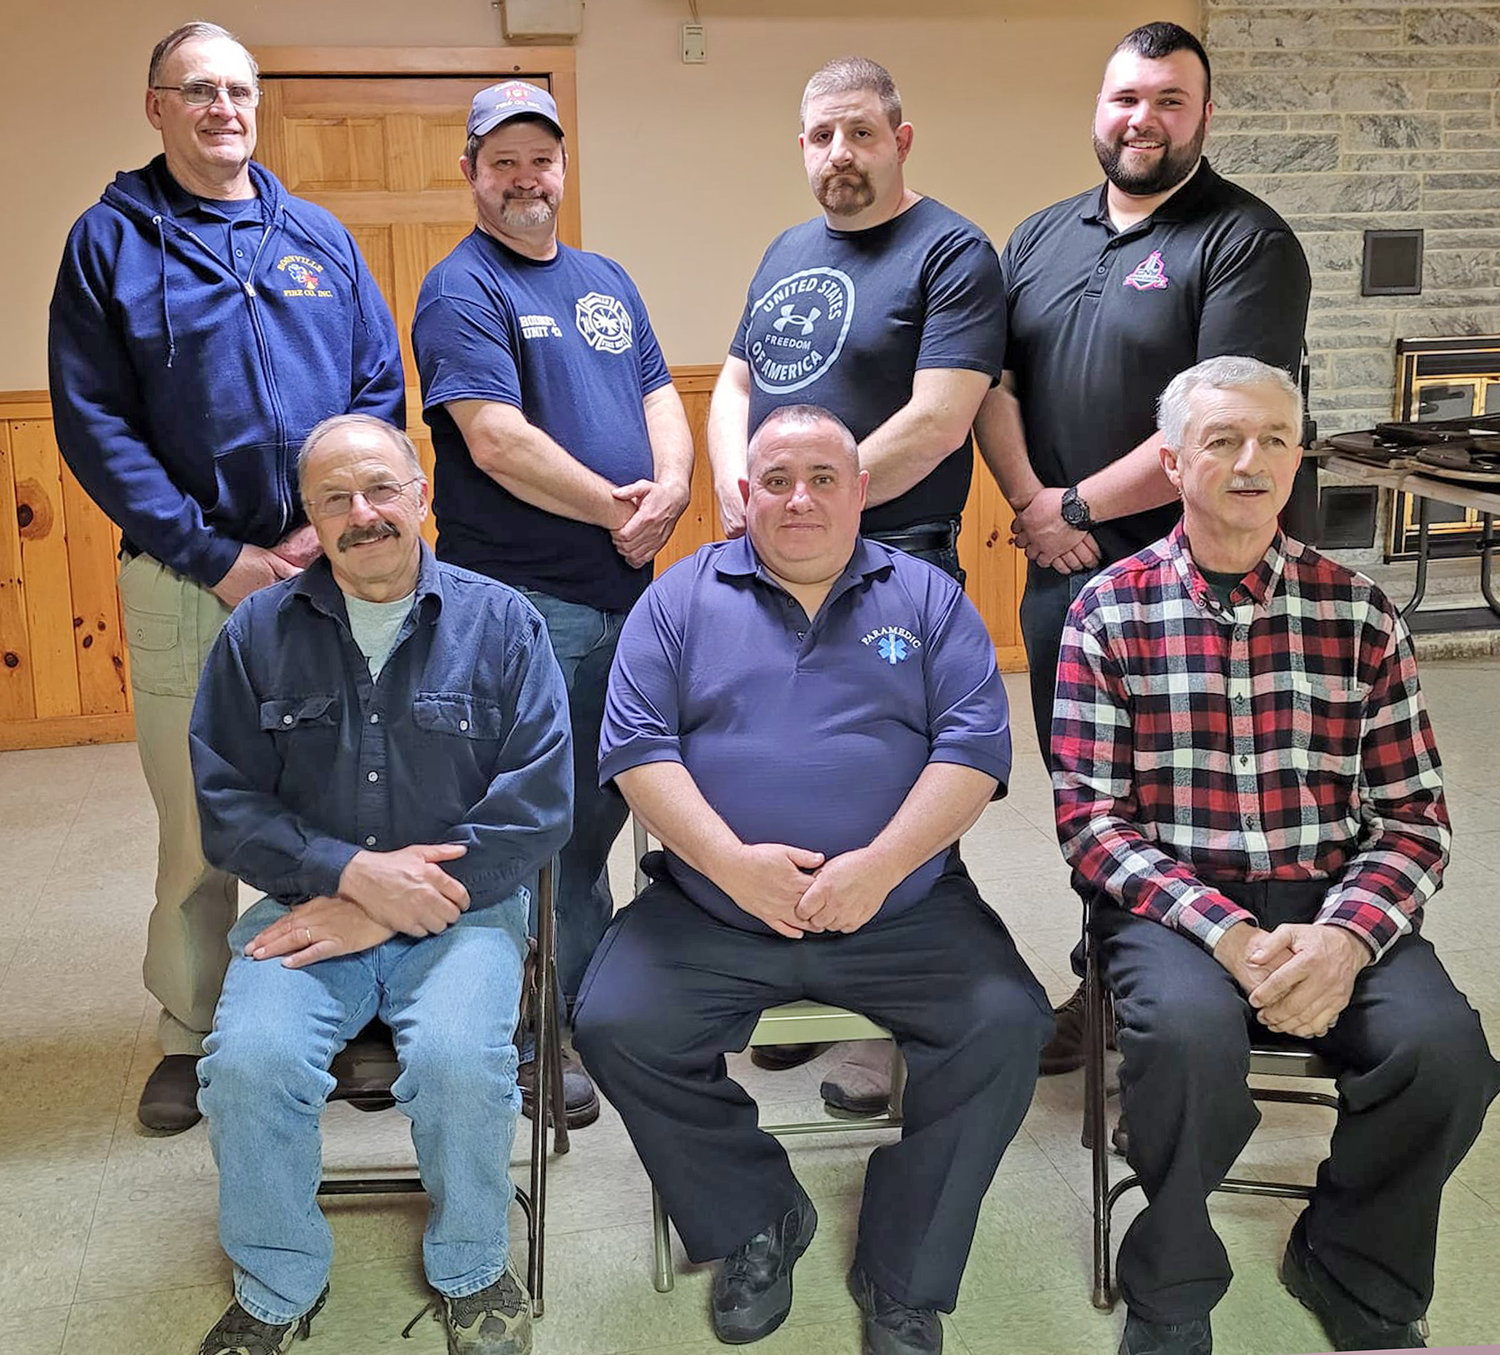 BOONVILLE FIRE BOARD OF DIRECTORS — Top row, from left: Dave Smith, Rod Thayer, Nick Amicucci and Matt Chrysler. Bottom row, from left: Treasurer John Croniser, Secretary Bob Sterling and Vice President Mack Ingersoll.